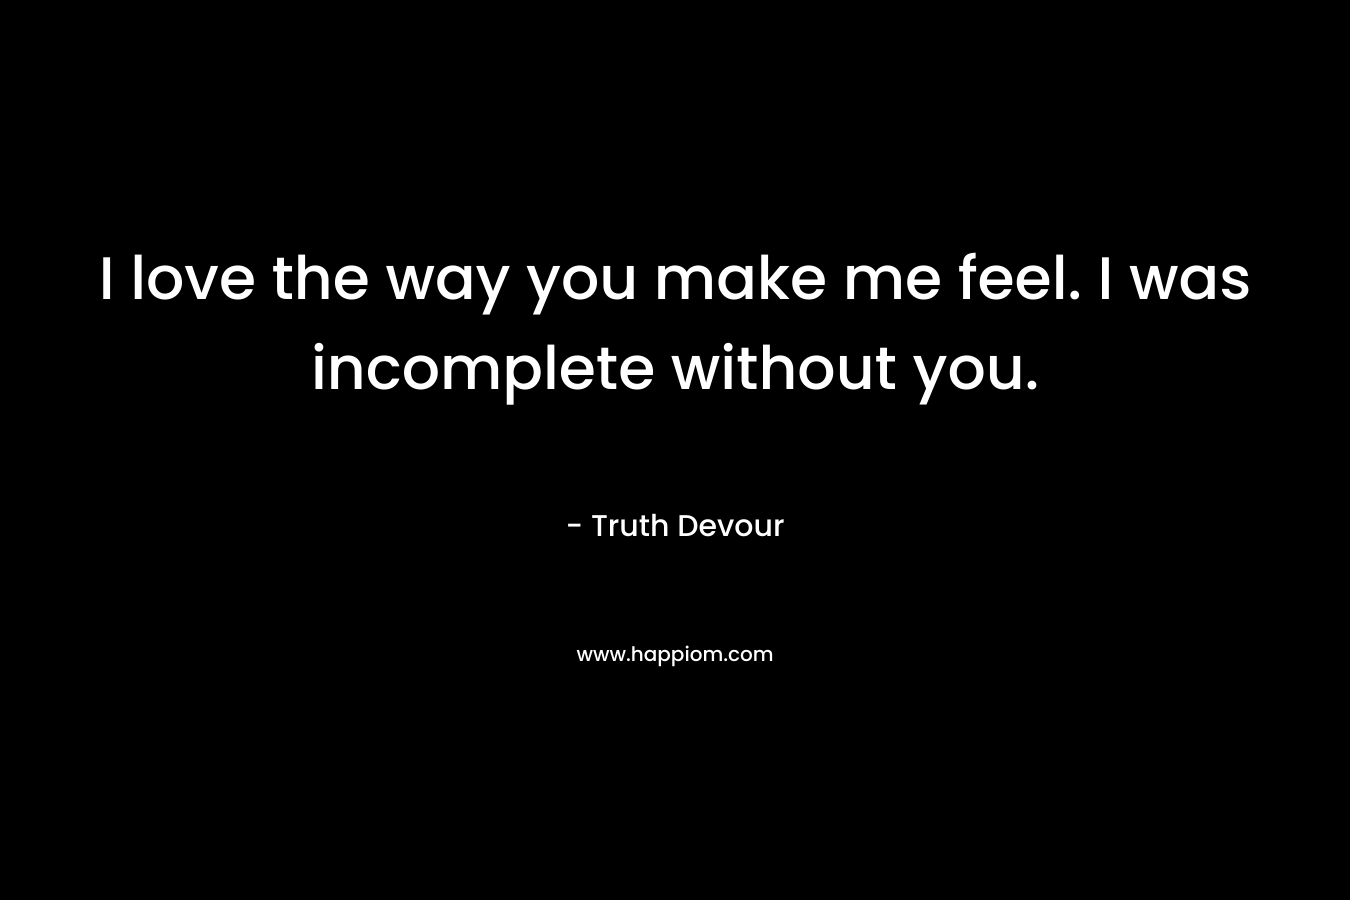 I love the way you make me feel. I was incomplete without you.